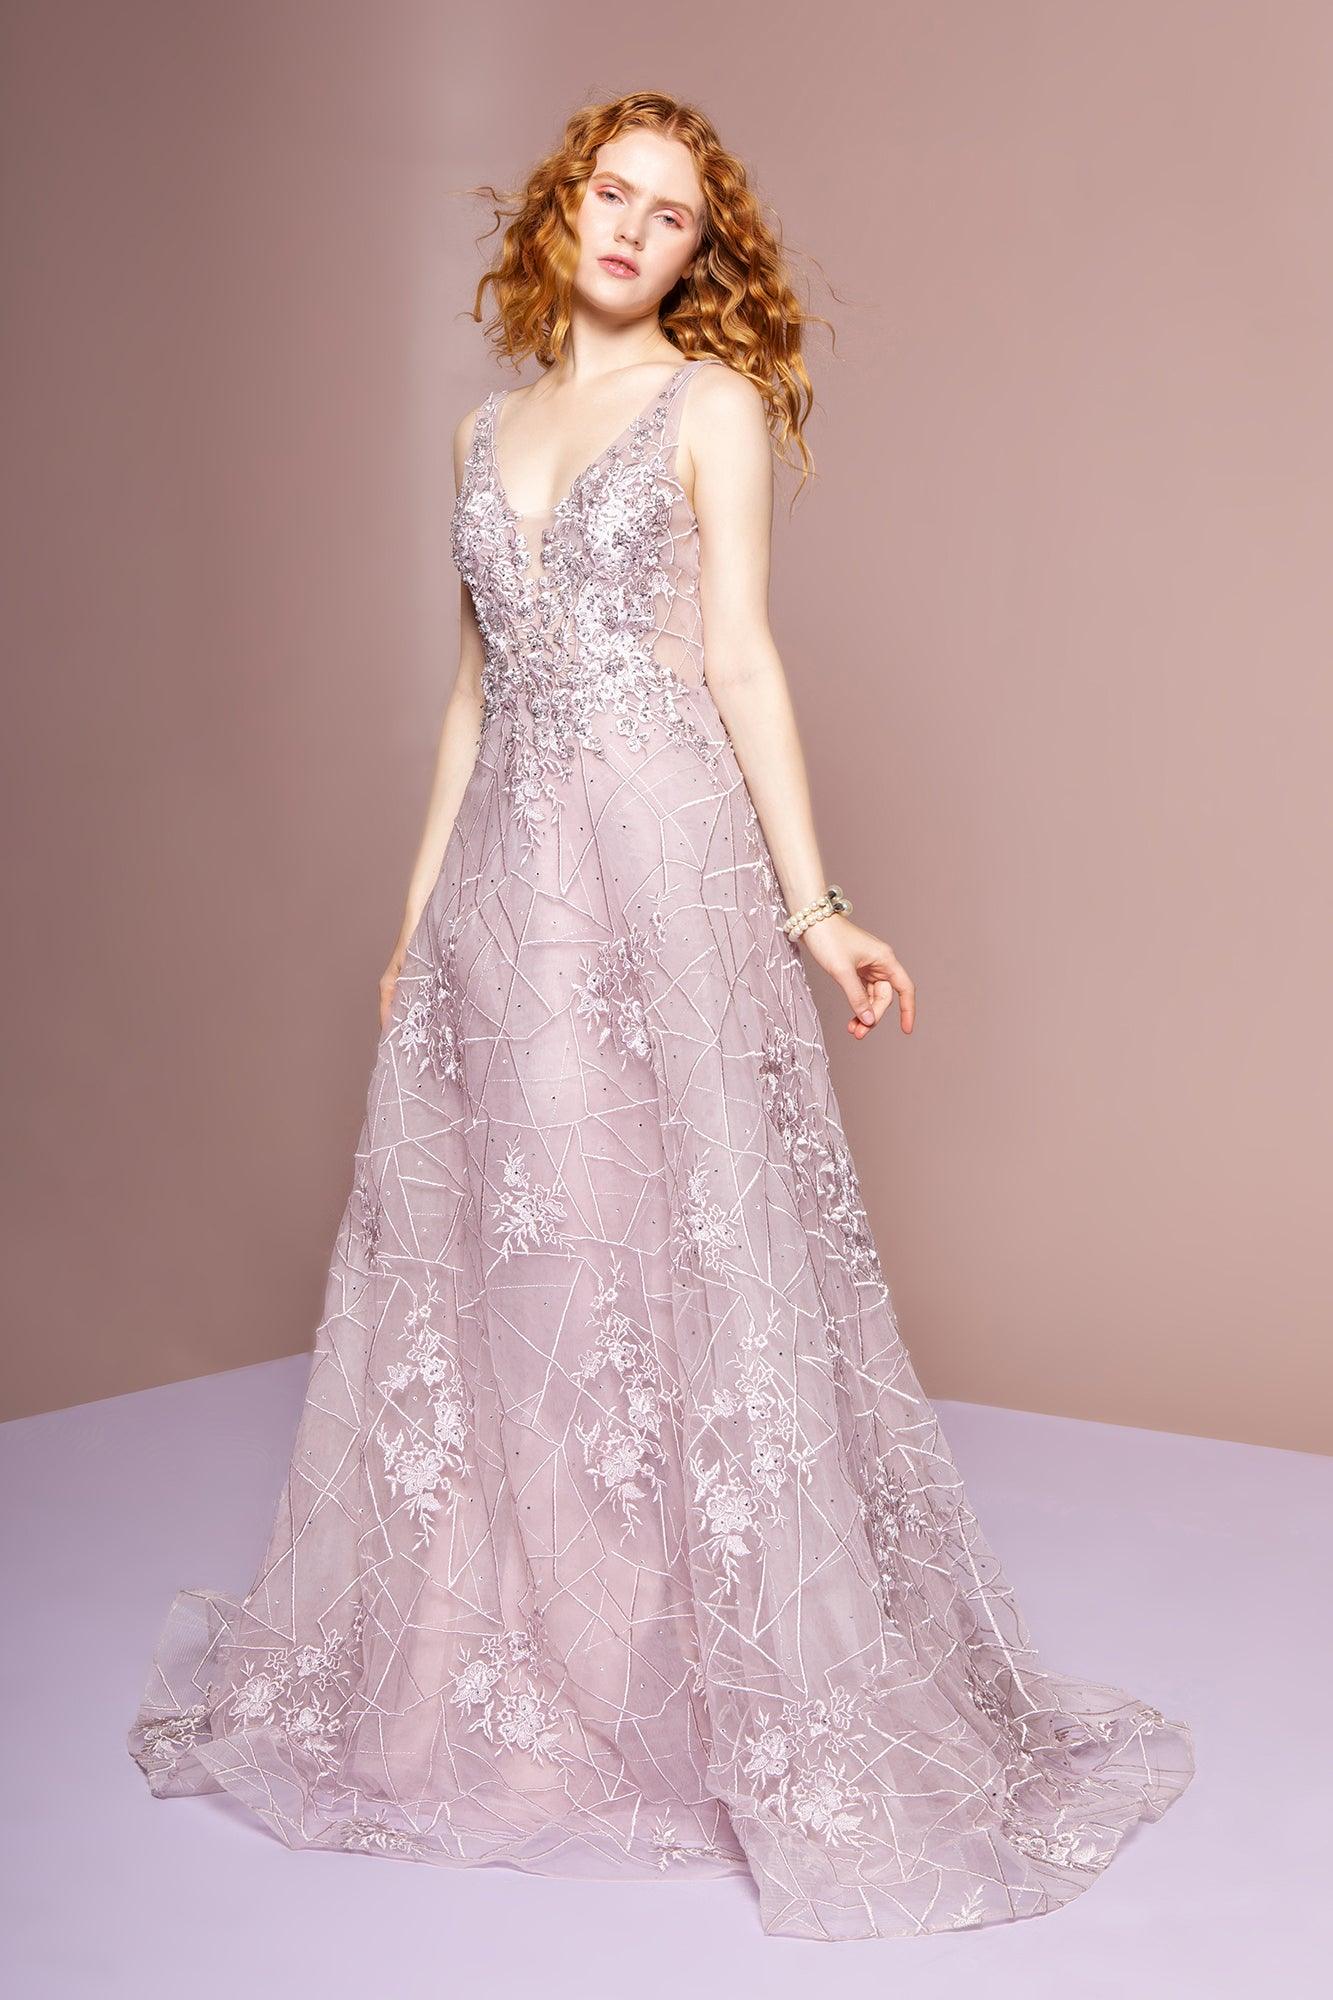 Mesh Illusion Embroidery Long Prom Dress - The Dress Outlet Elizabeth K